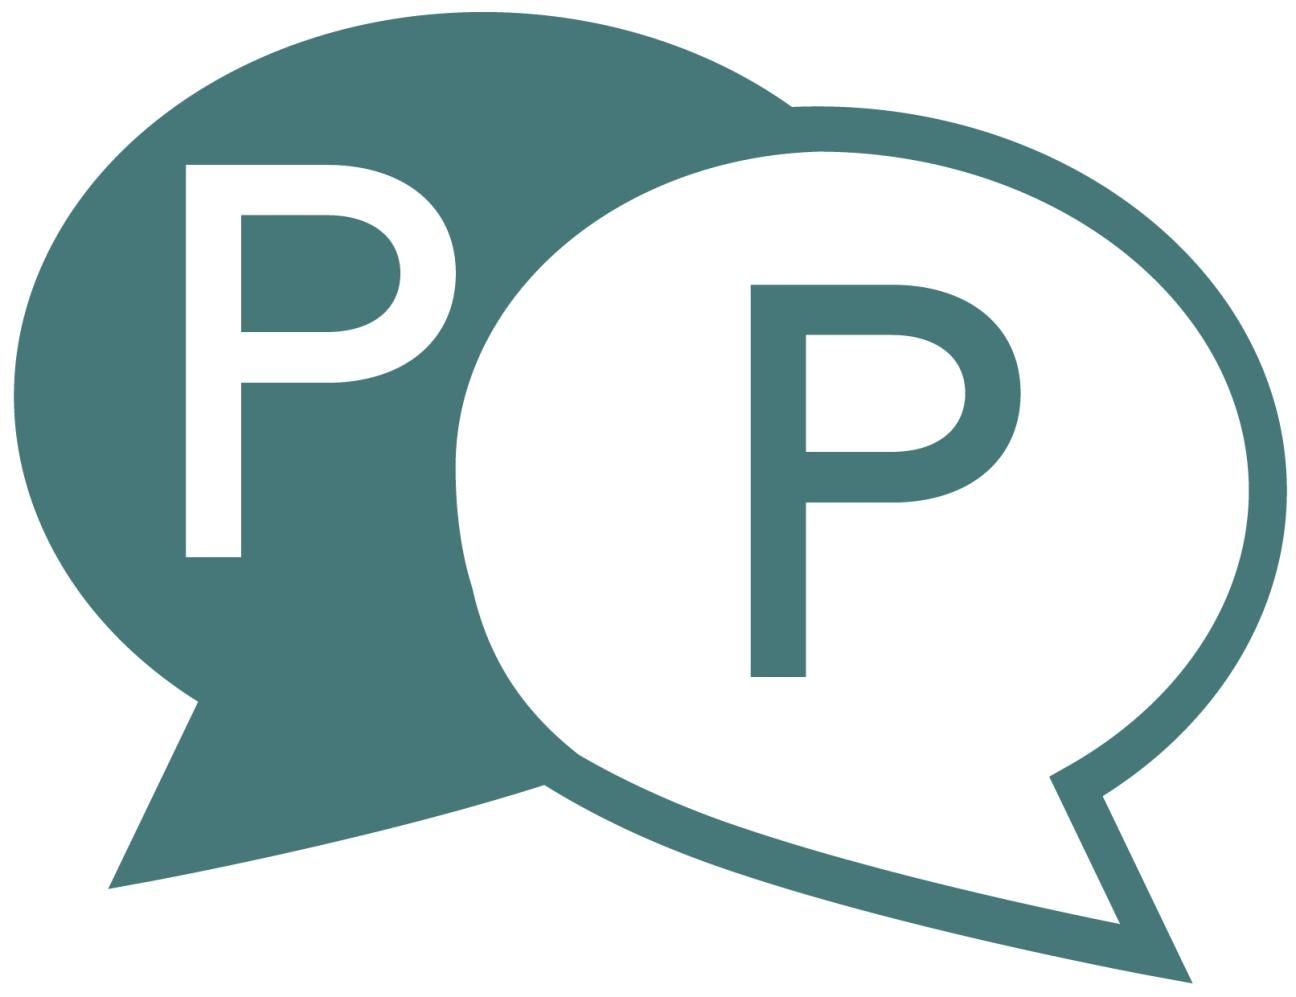 Peer Education Project logo of two speech bubbles with "P" in each